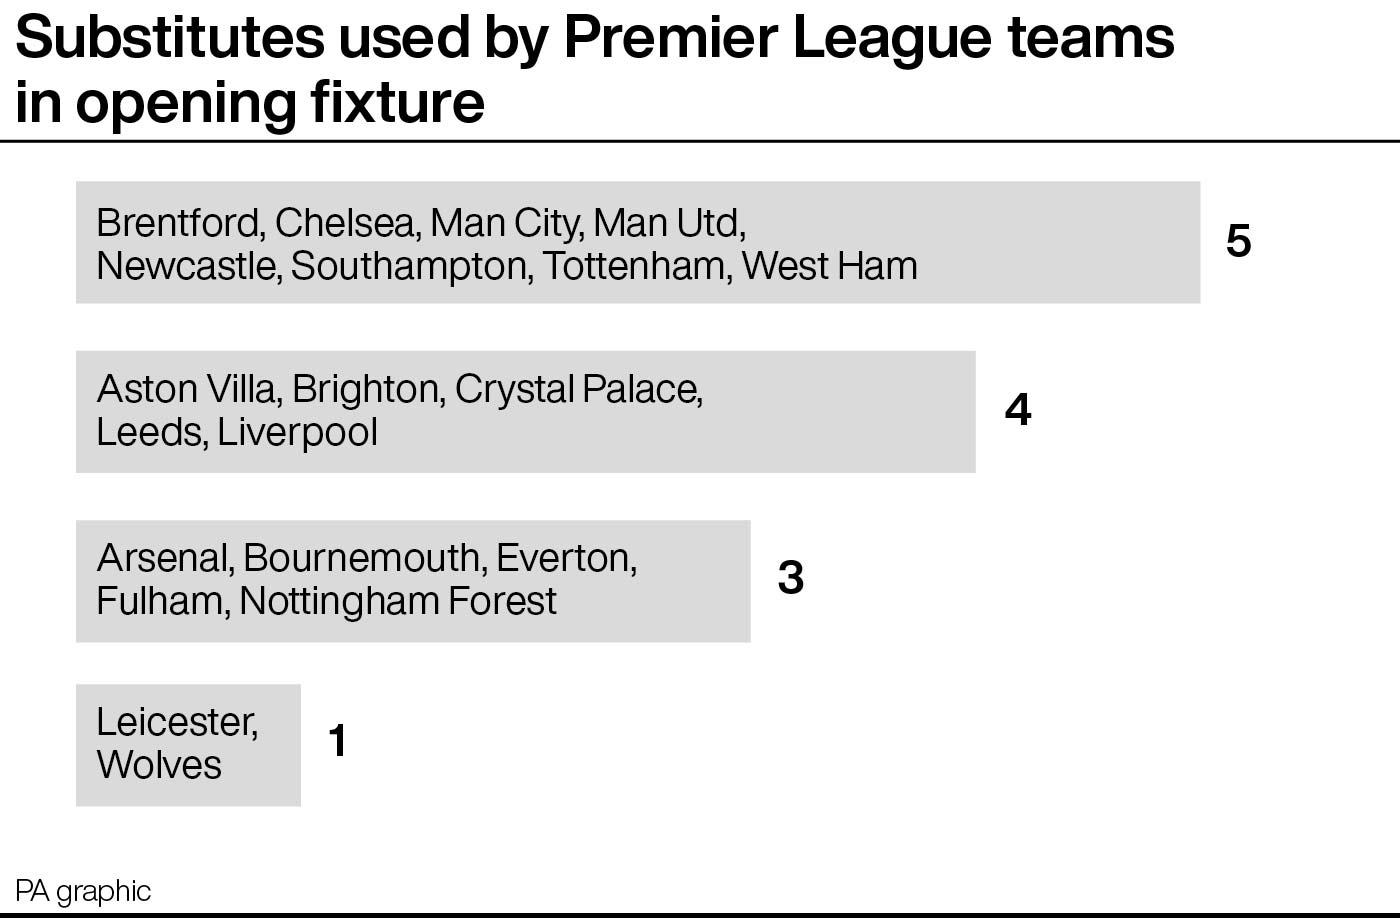 Substitutes used by Premier League teams in opening fixture